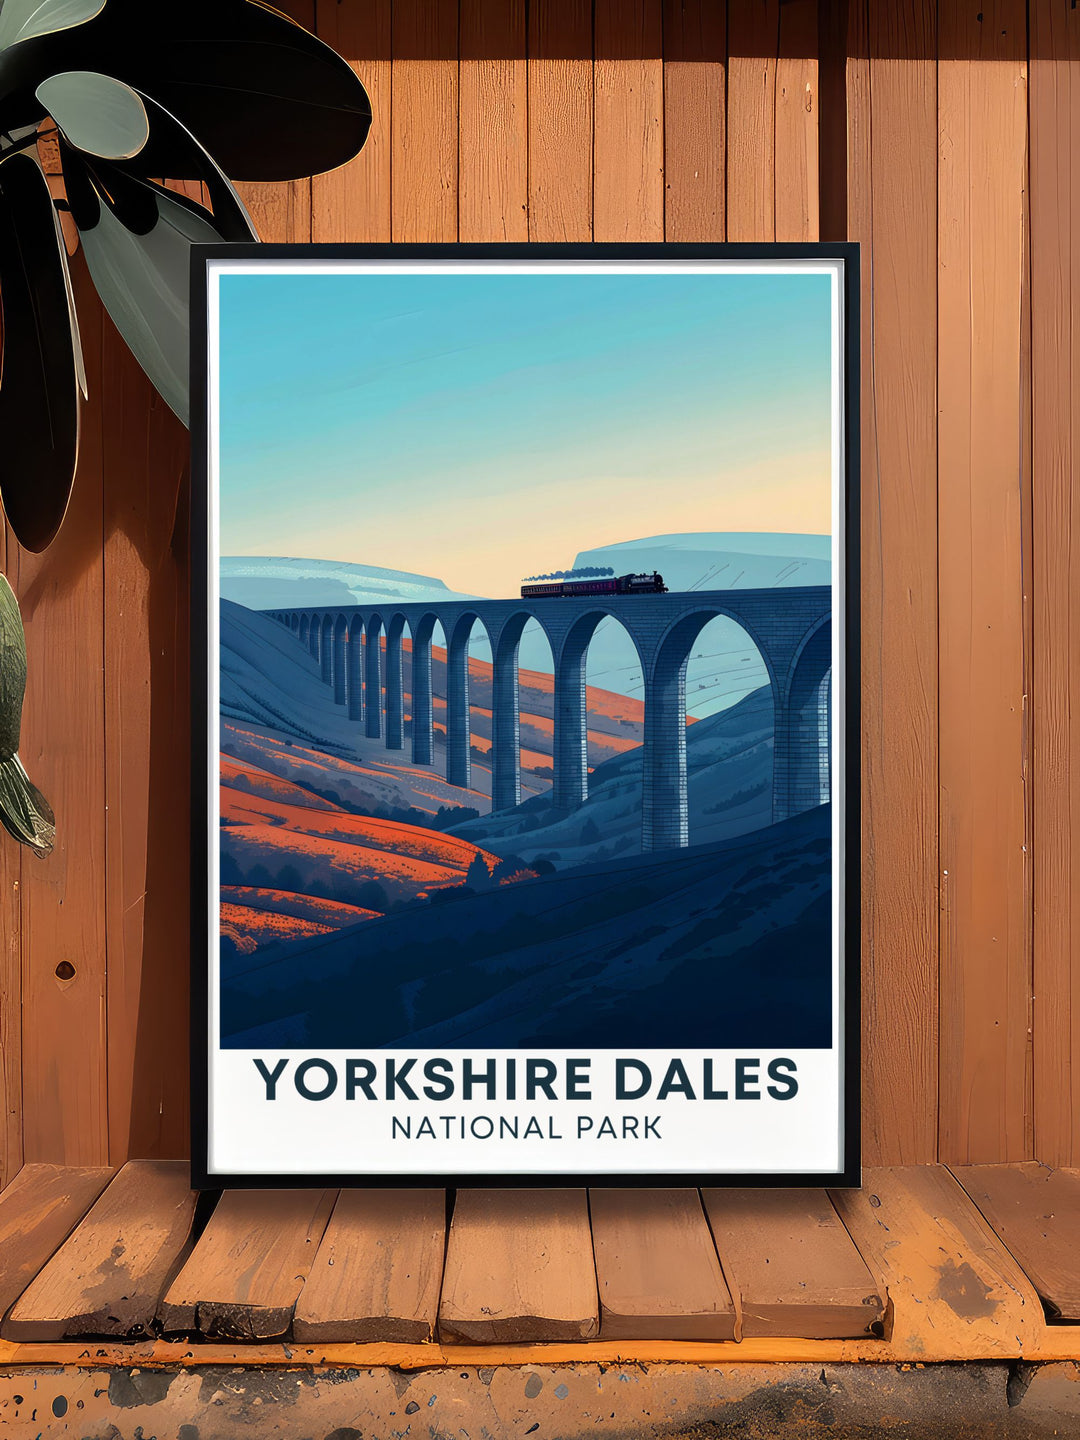 This Ribblehead Viaduct travel poster brings the picturesque beauty of the Yorkshire Dales into your home perfect for wall art that captures the essence of this historic landmark.